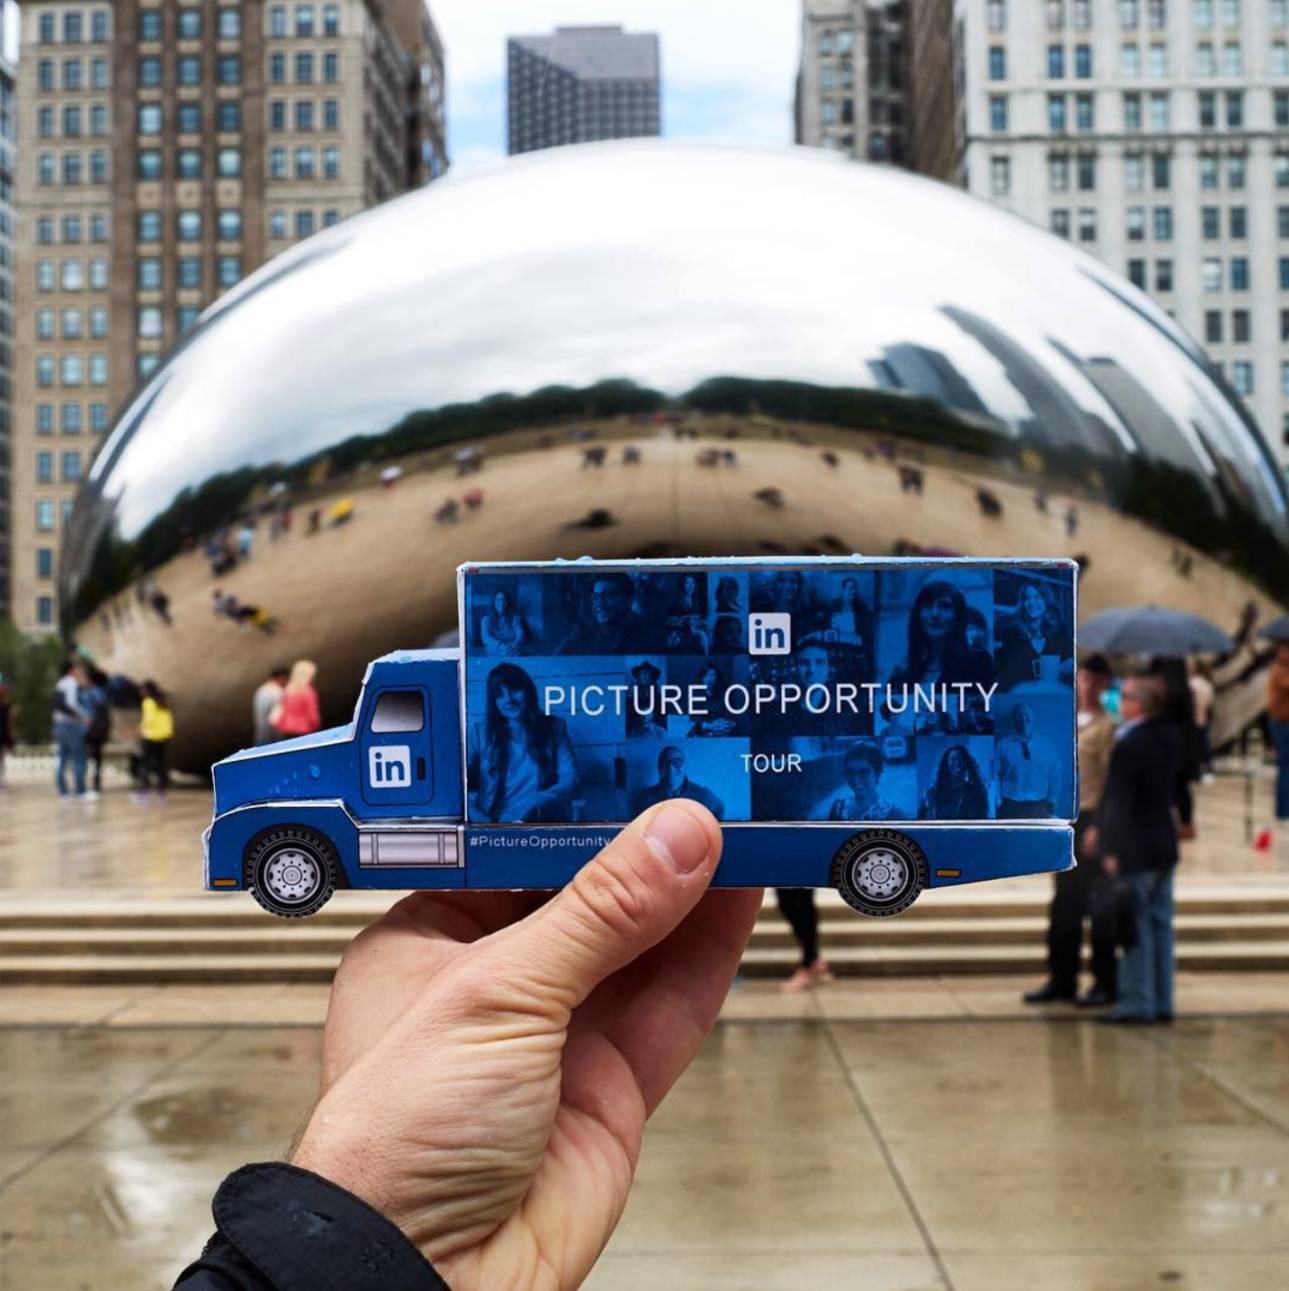 ENTITY shares LinkedIn profile tips. Photo of "The Bean" in Chicago.